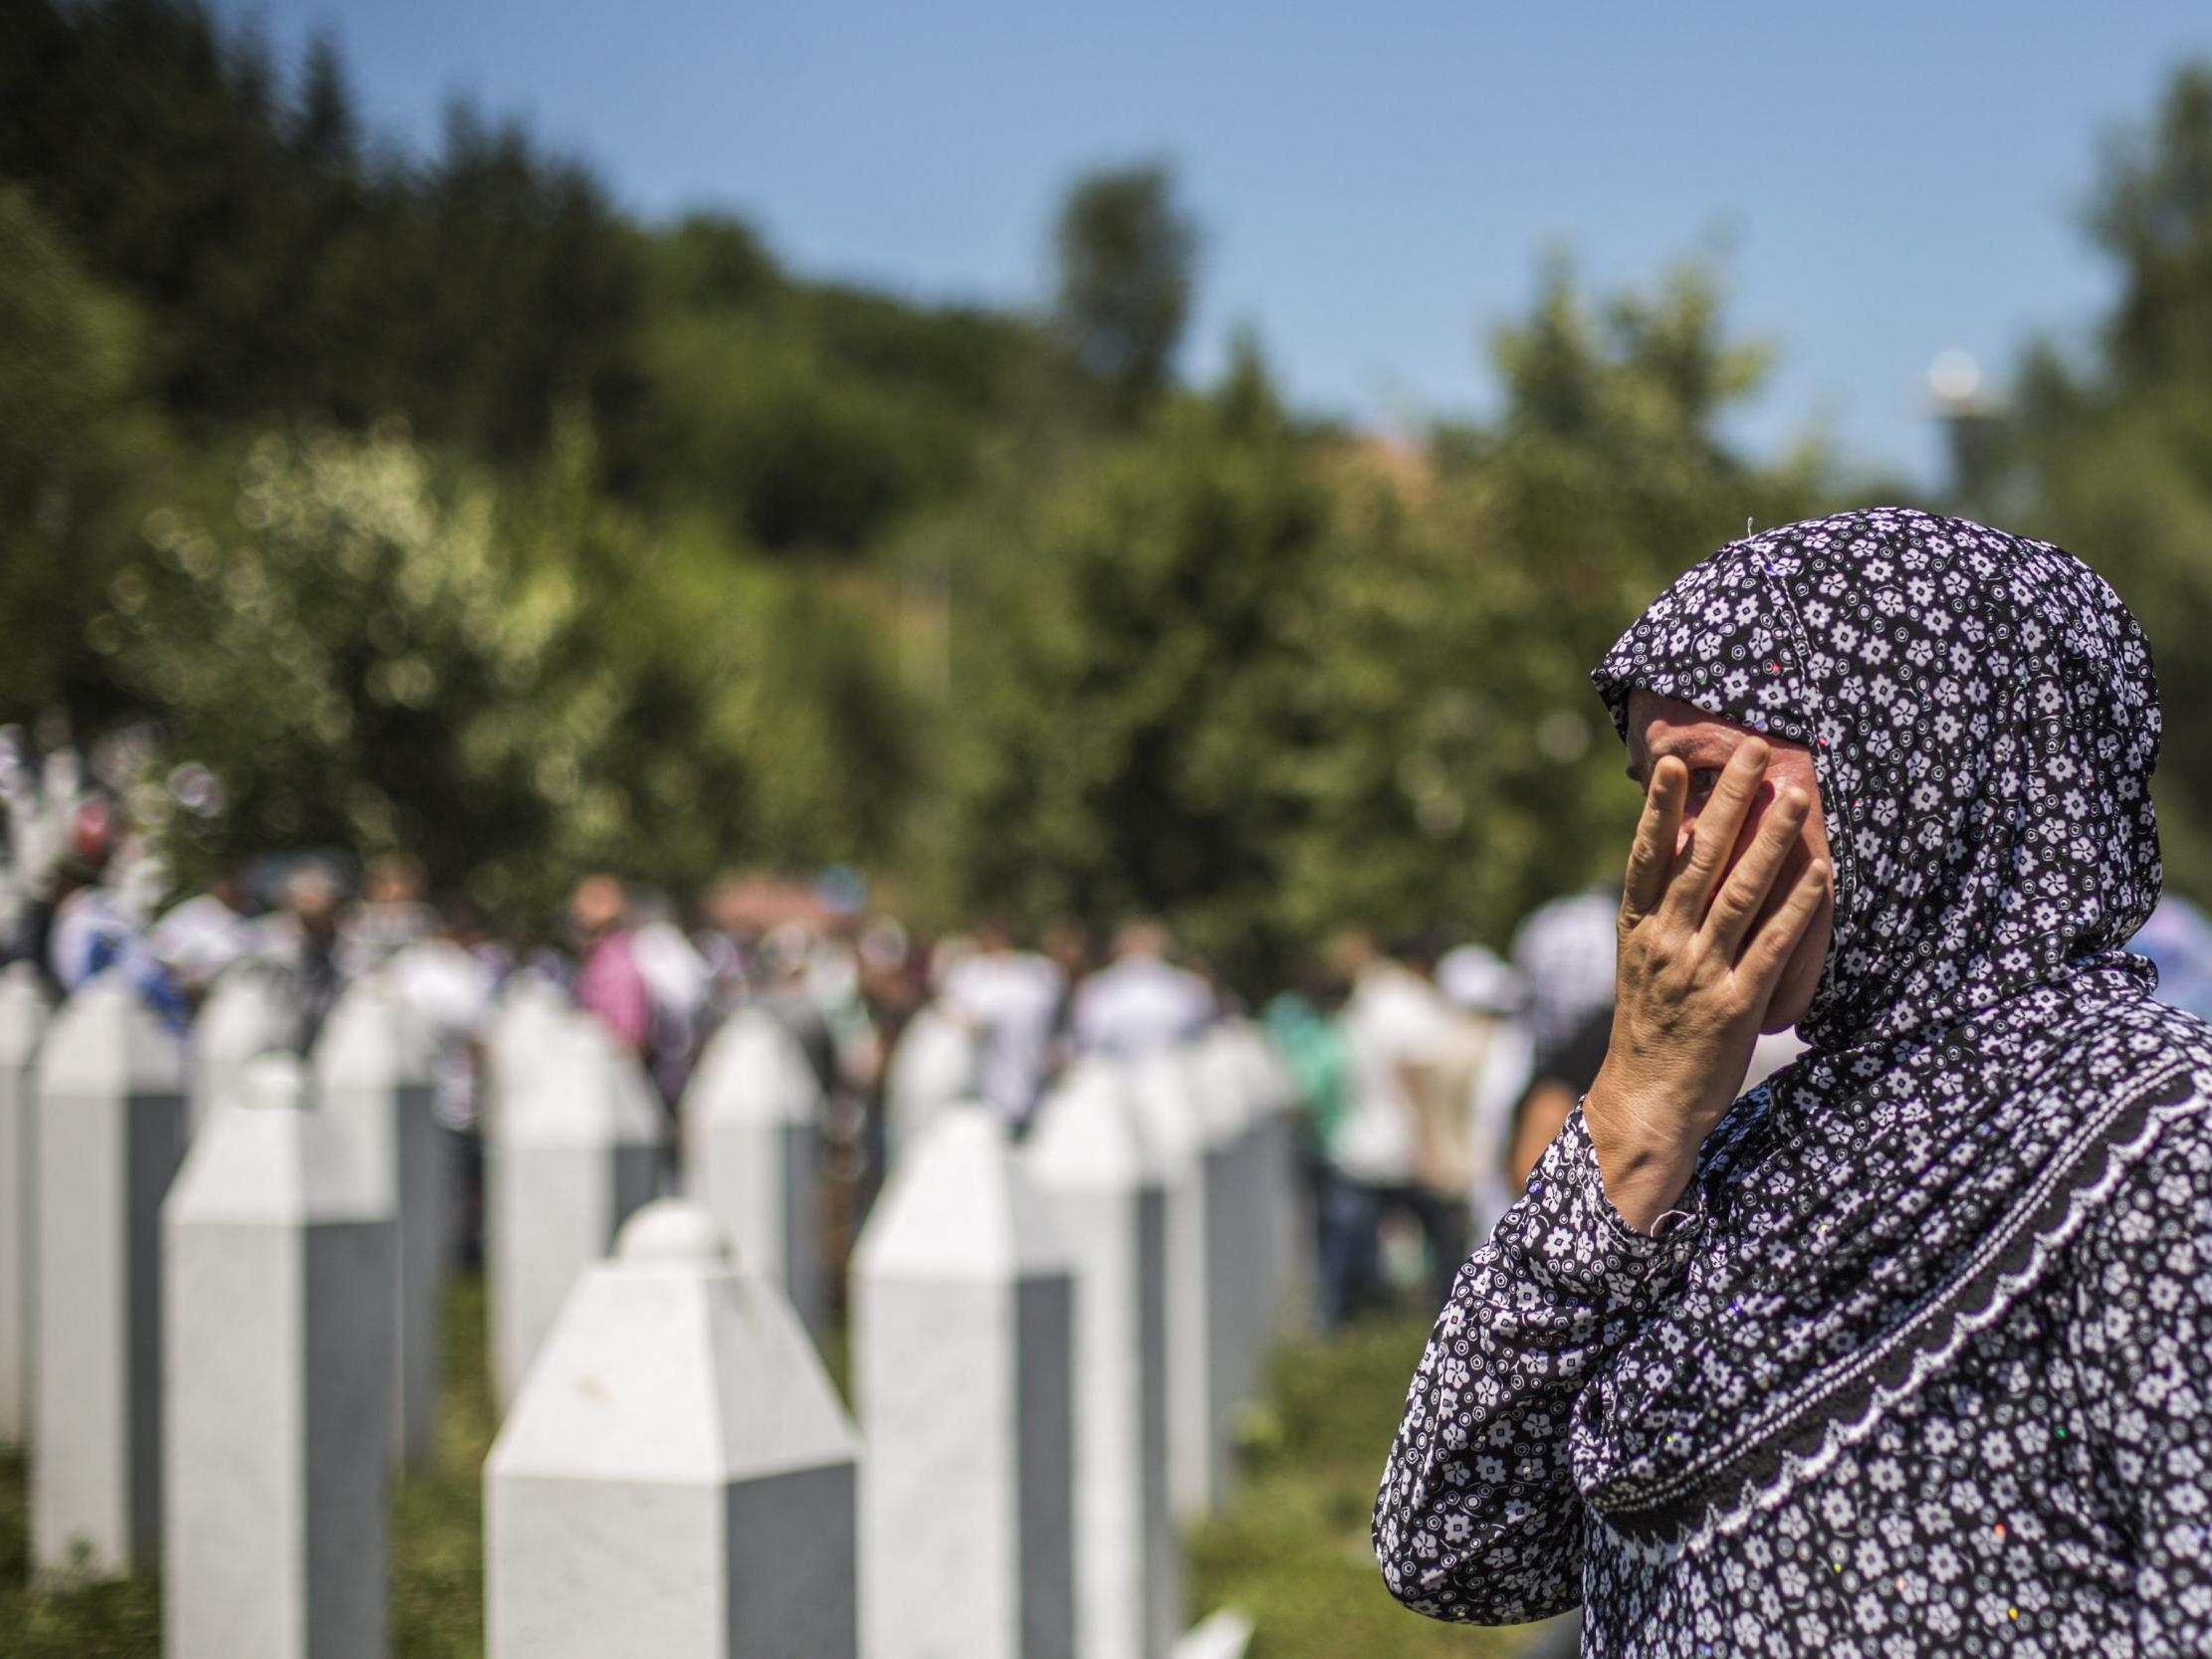 The Srebrenica massacre anniversary should serve as a reminder â€“ when we ignore atrocities, we do so at our peril